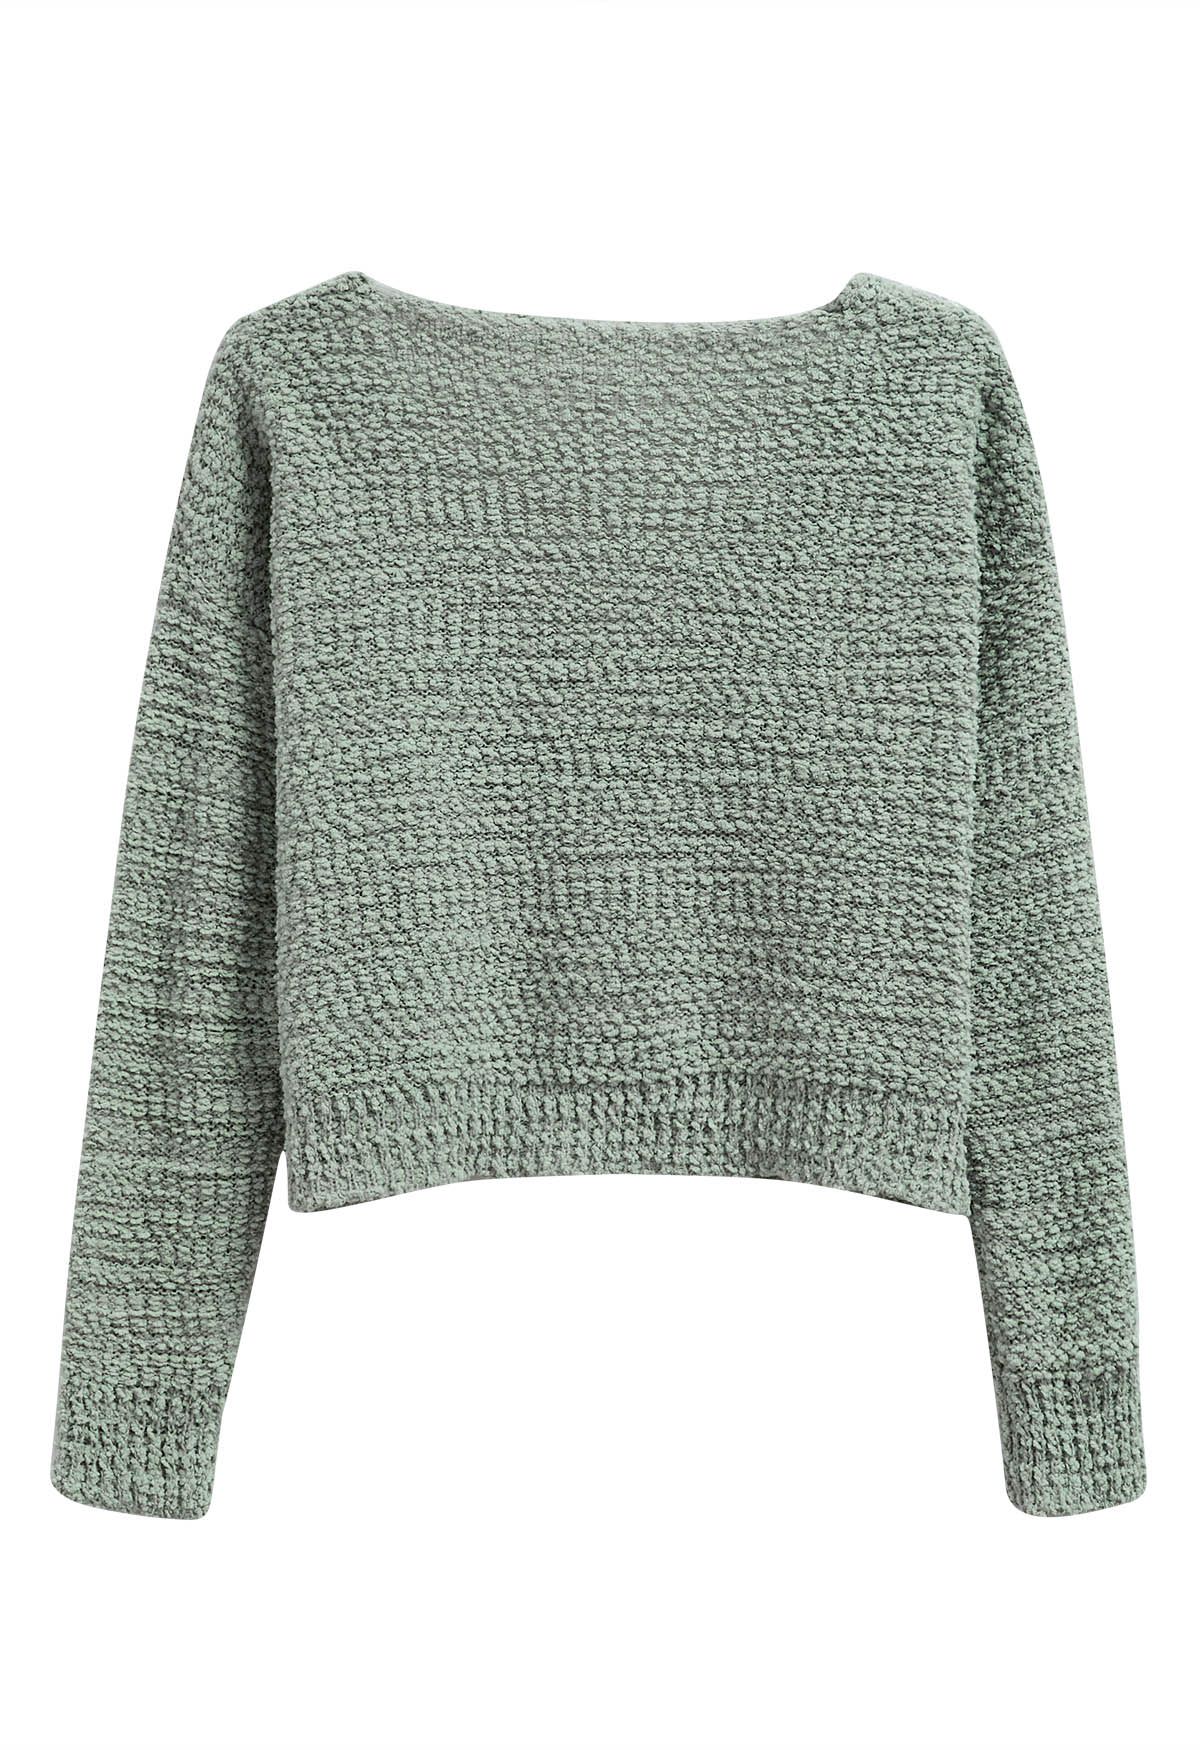 V-Neck Comfy Knit Sweater in Pea Green